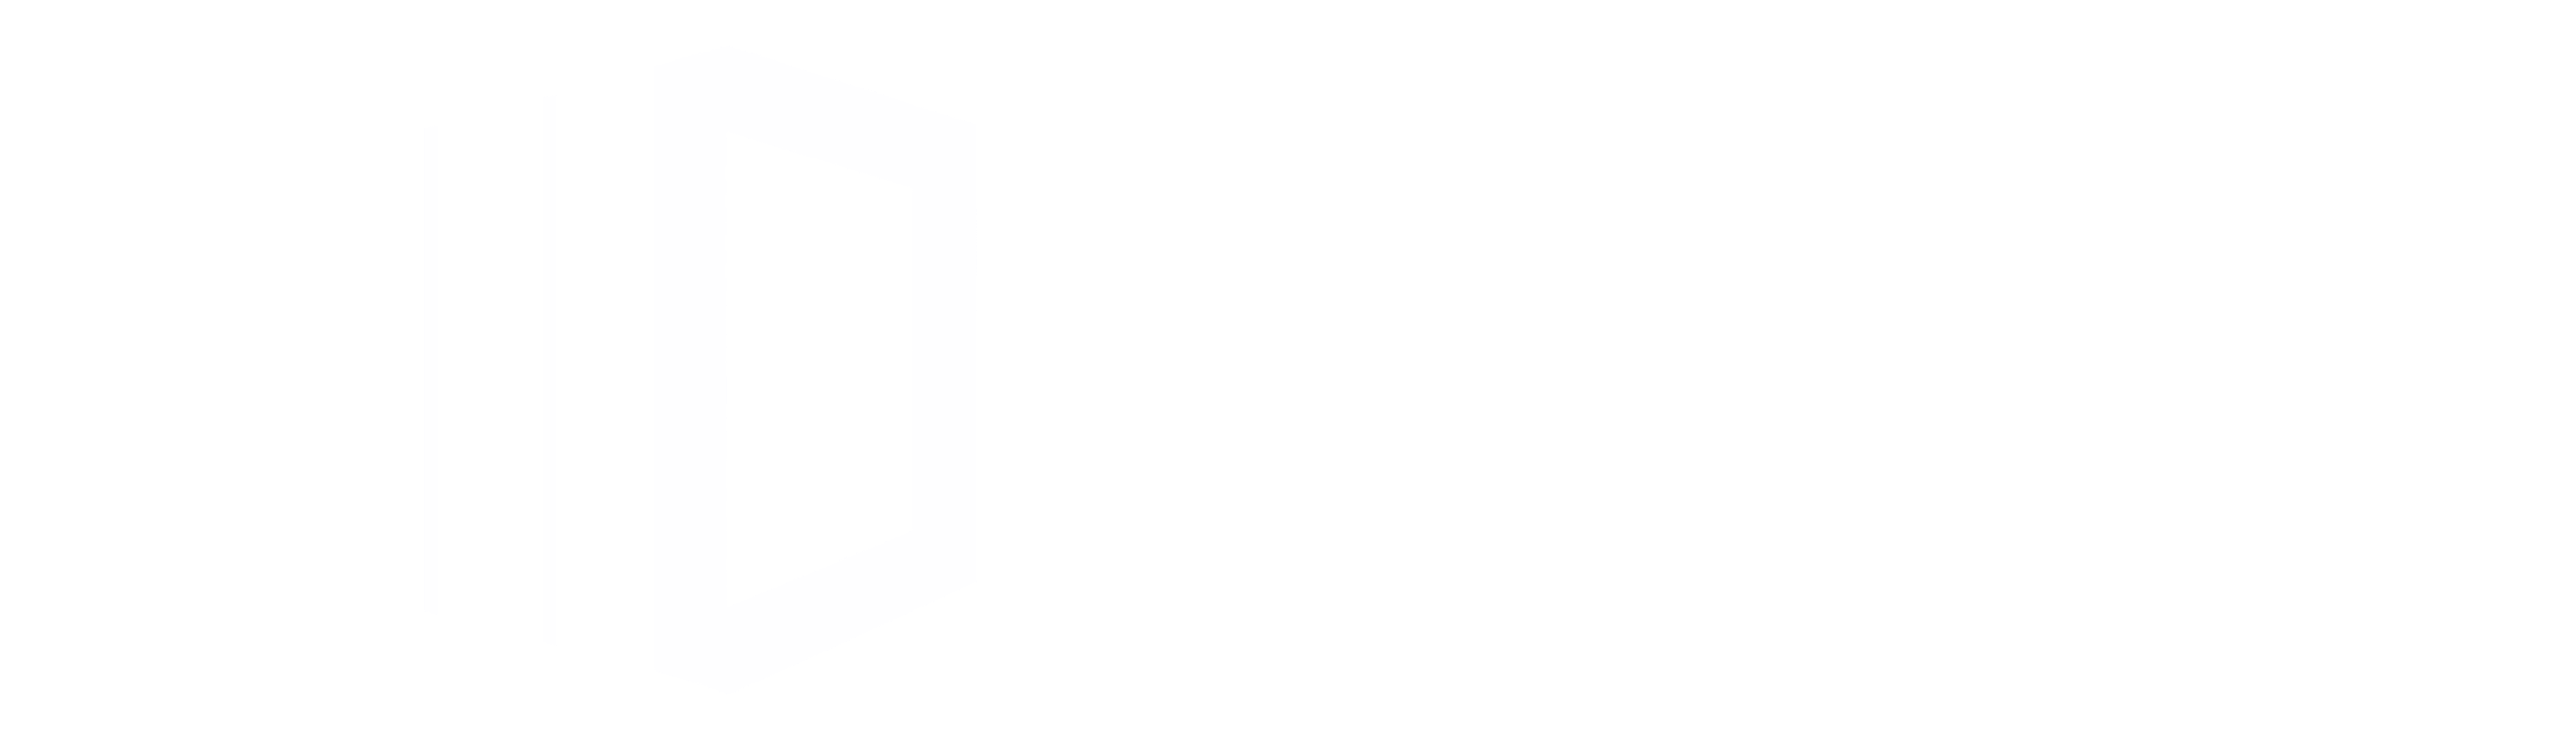 Insource Installations